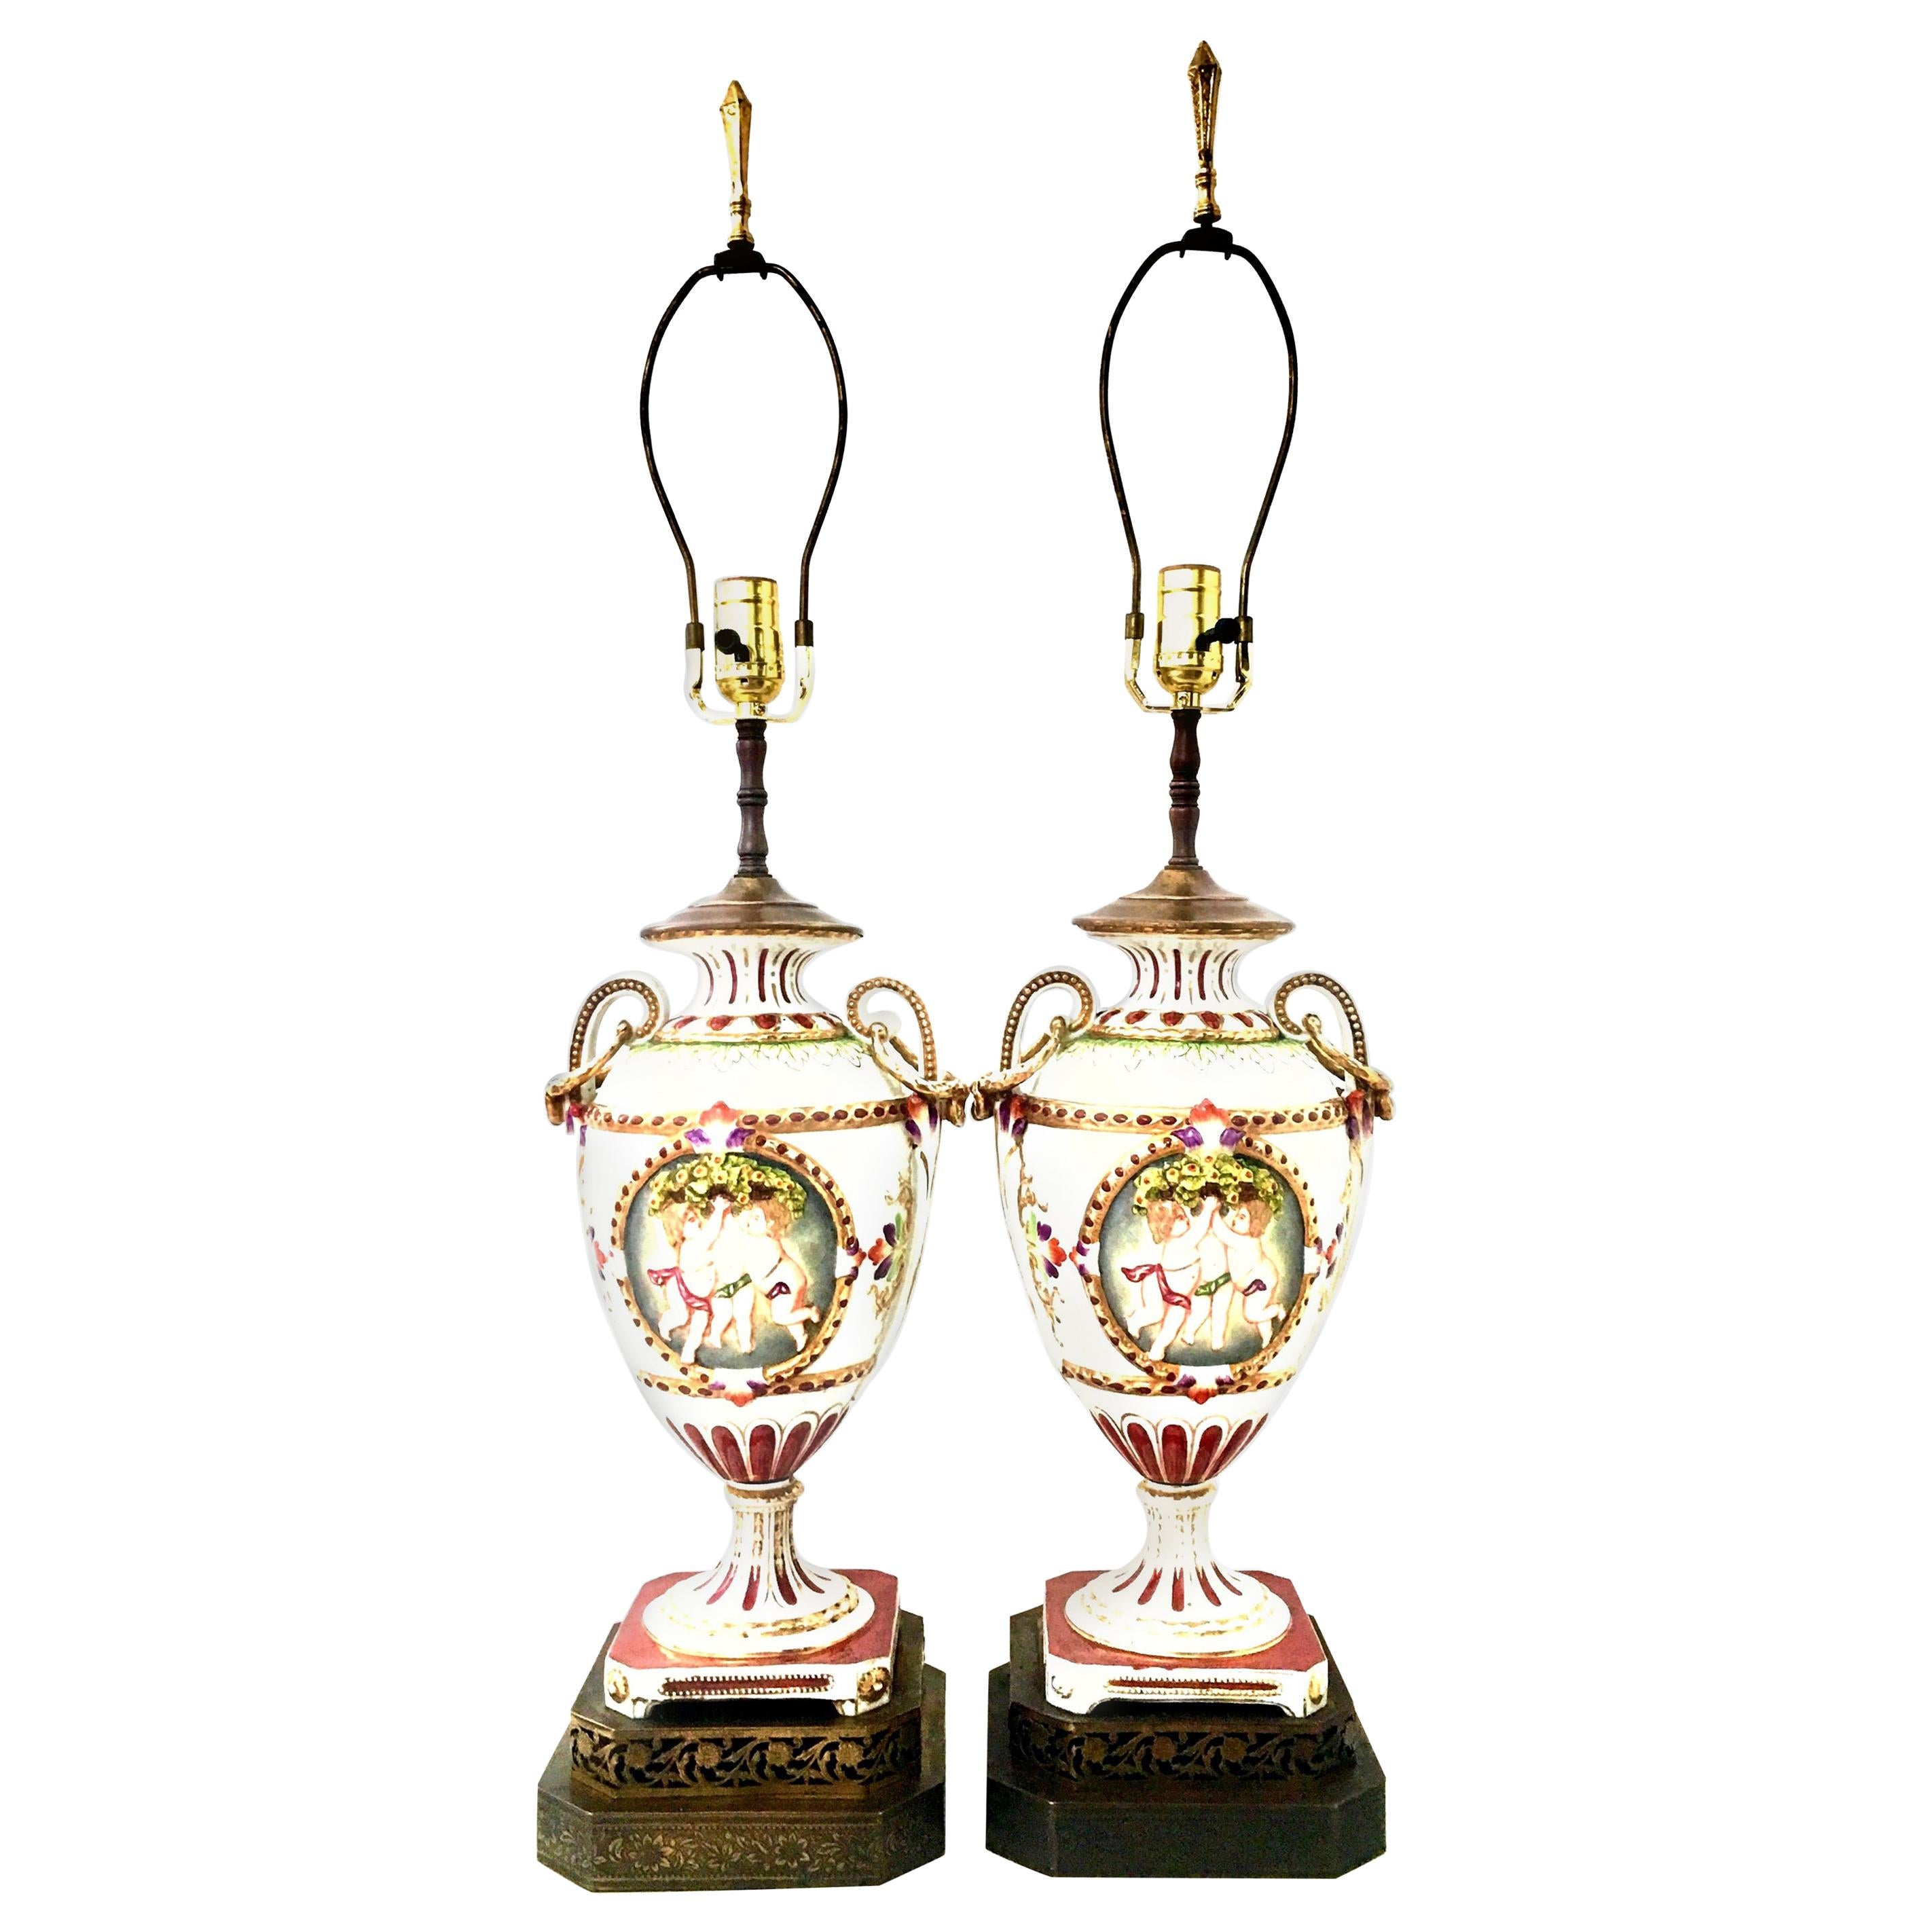 19th Century Pair of Royal Vienna Style Porcelain Hand Painted Portrait Lamps For Sale